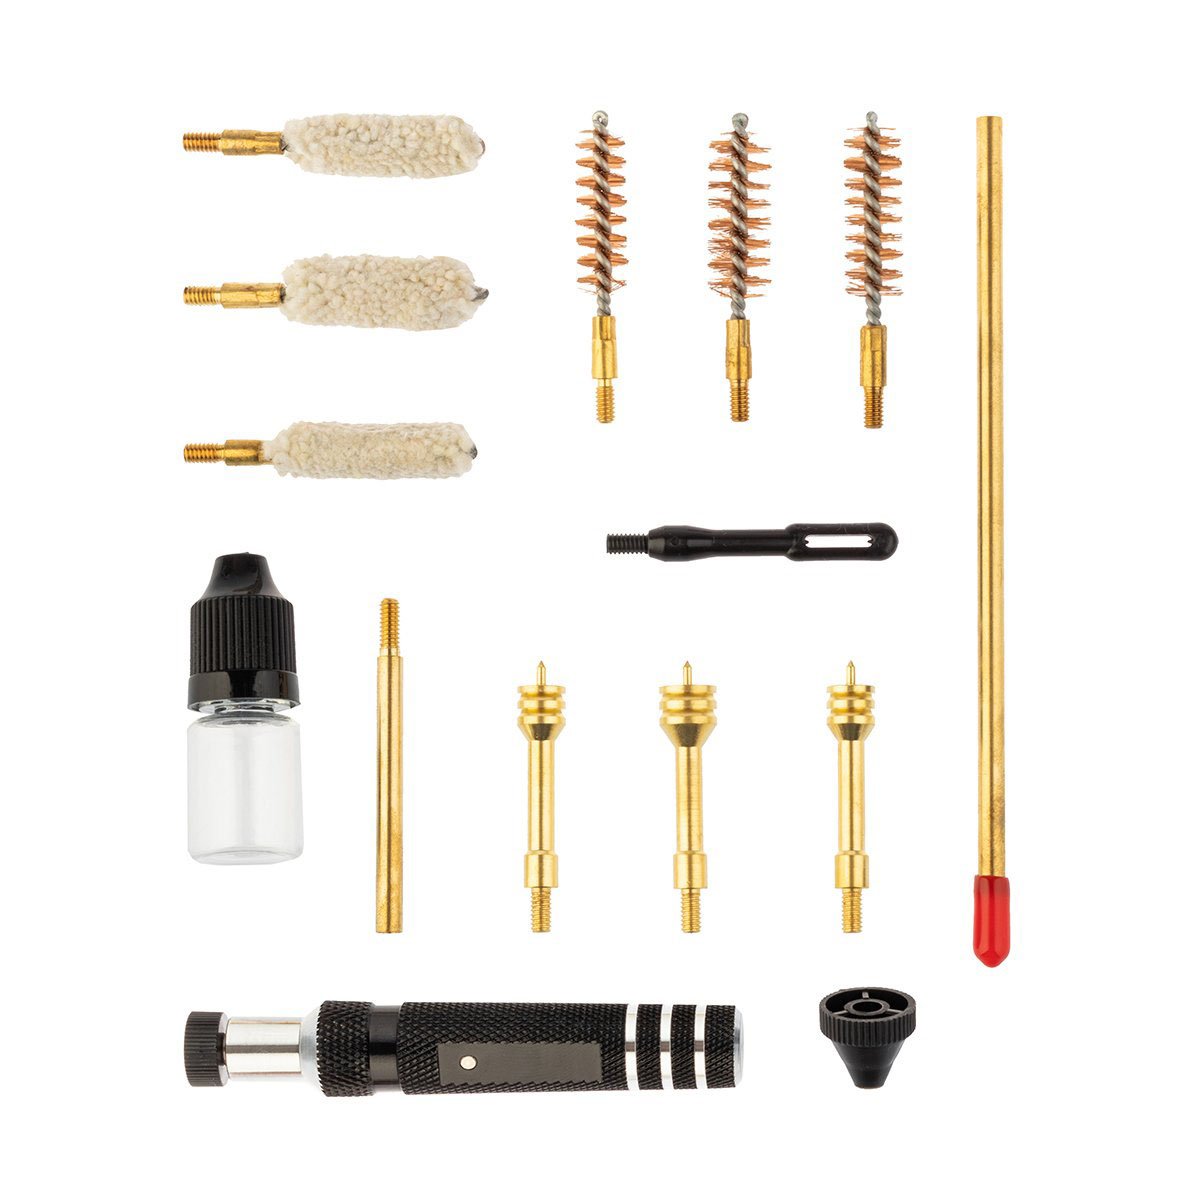 The Kit includes 3 bronze and 3 cotton gun swabs, a gunstick with a handle, 3 patch needles, one plastic, and one brazen fire swab, a cone director, and an oil container.